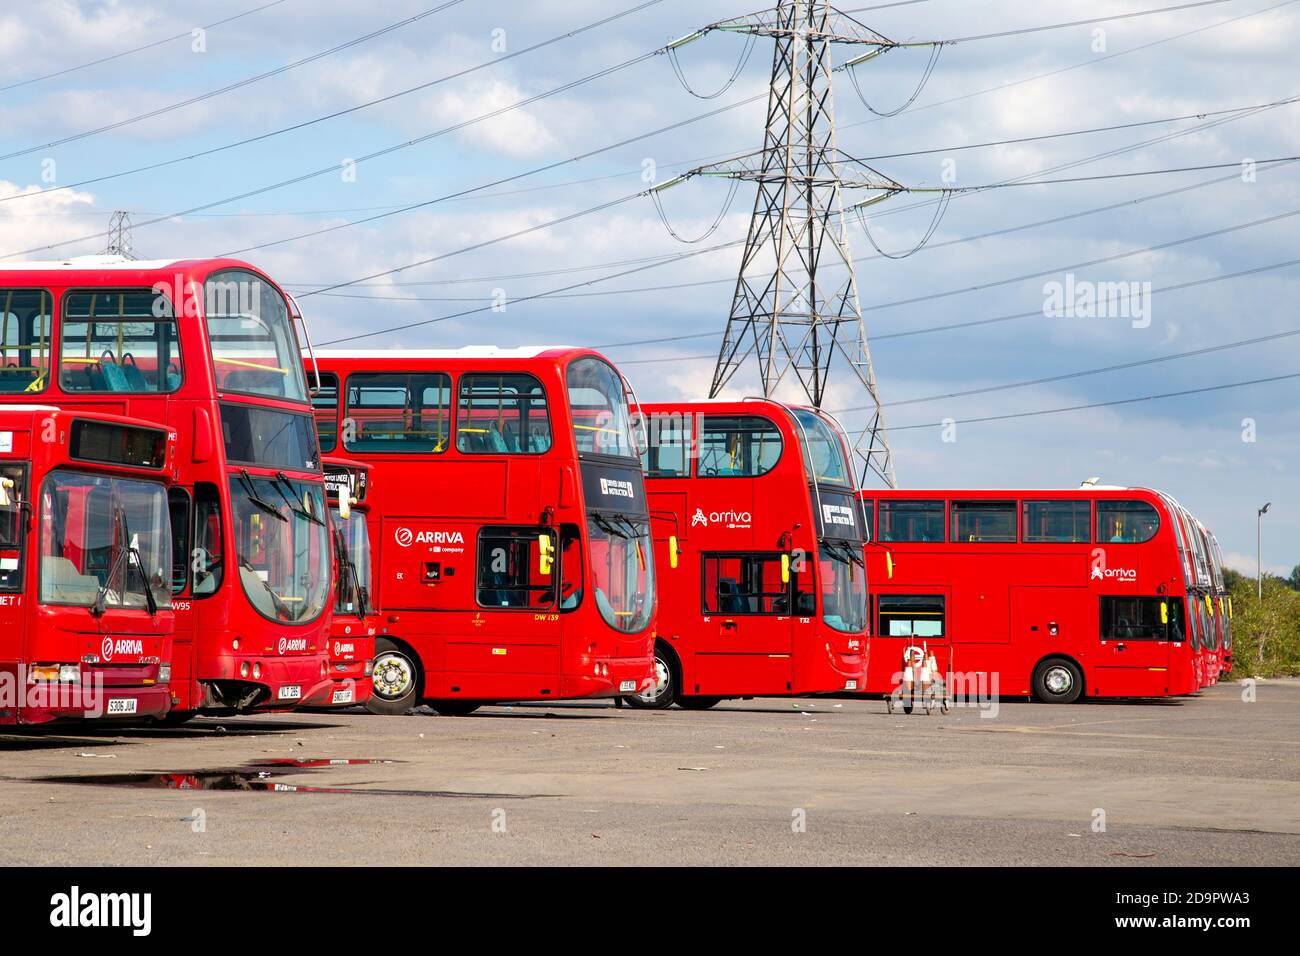 Red double-decker busses parked at the Arriva North London Bus Depot by River Lee Navigation Canal, Lee Valley, London, UK Stock Photo